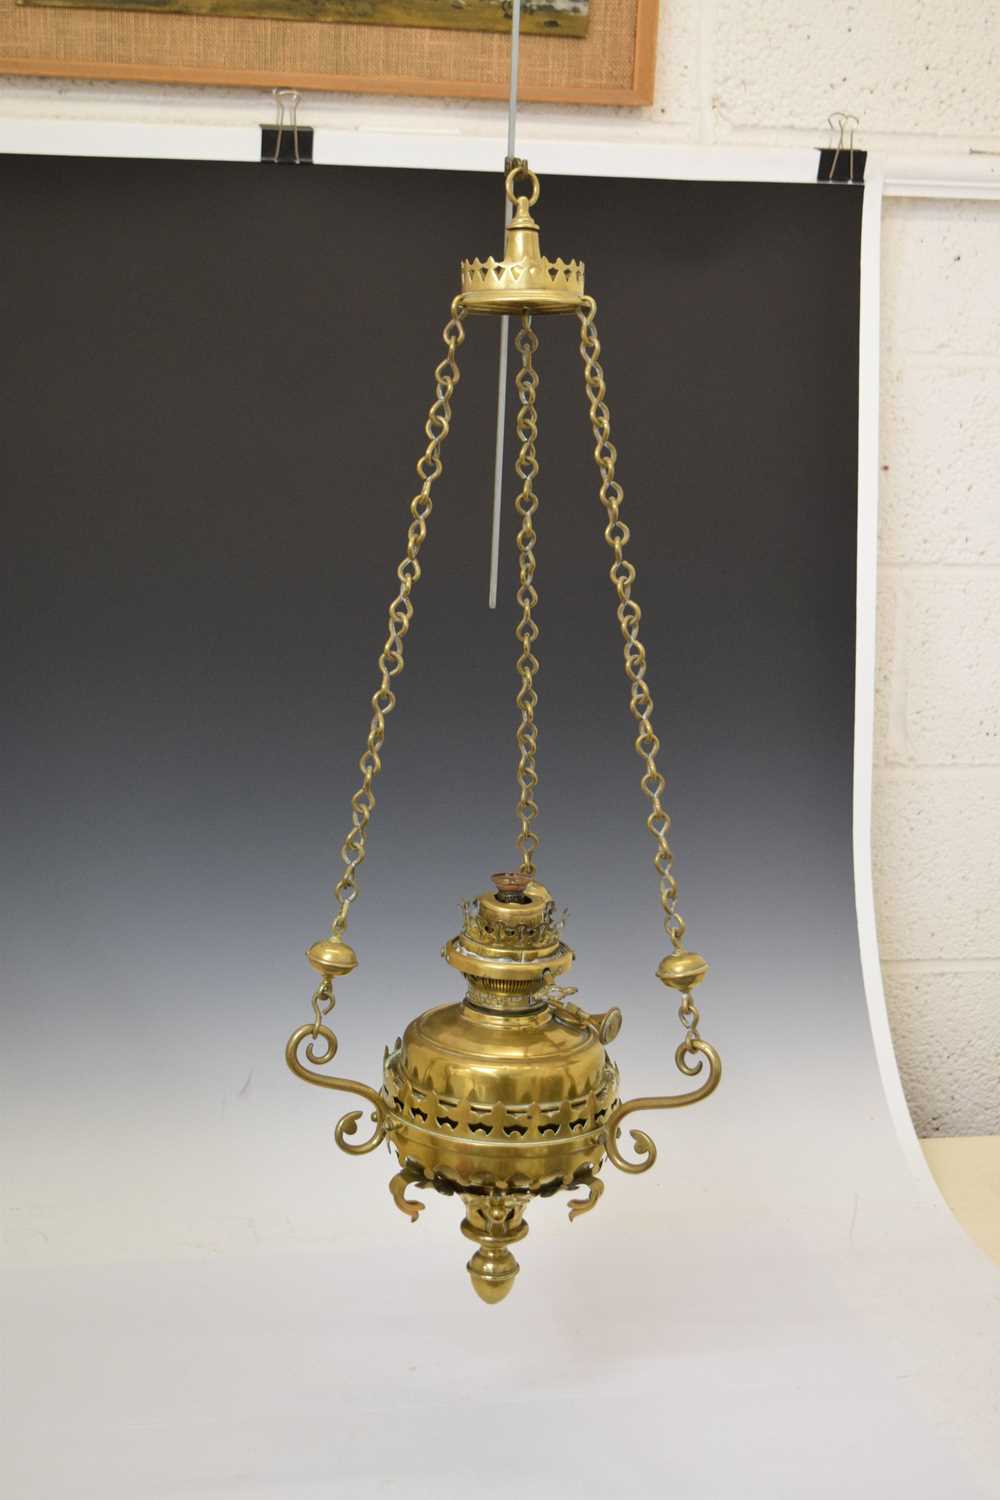 Early 20th century brass ecclesiastical light fitting - Image 3 of 13